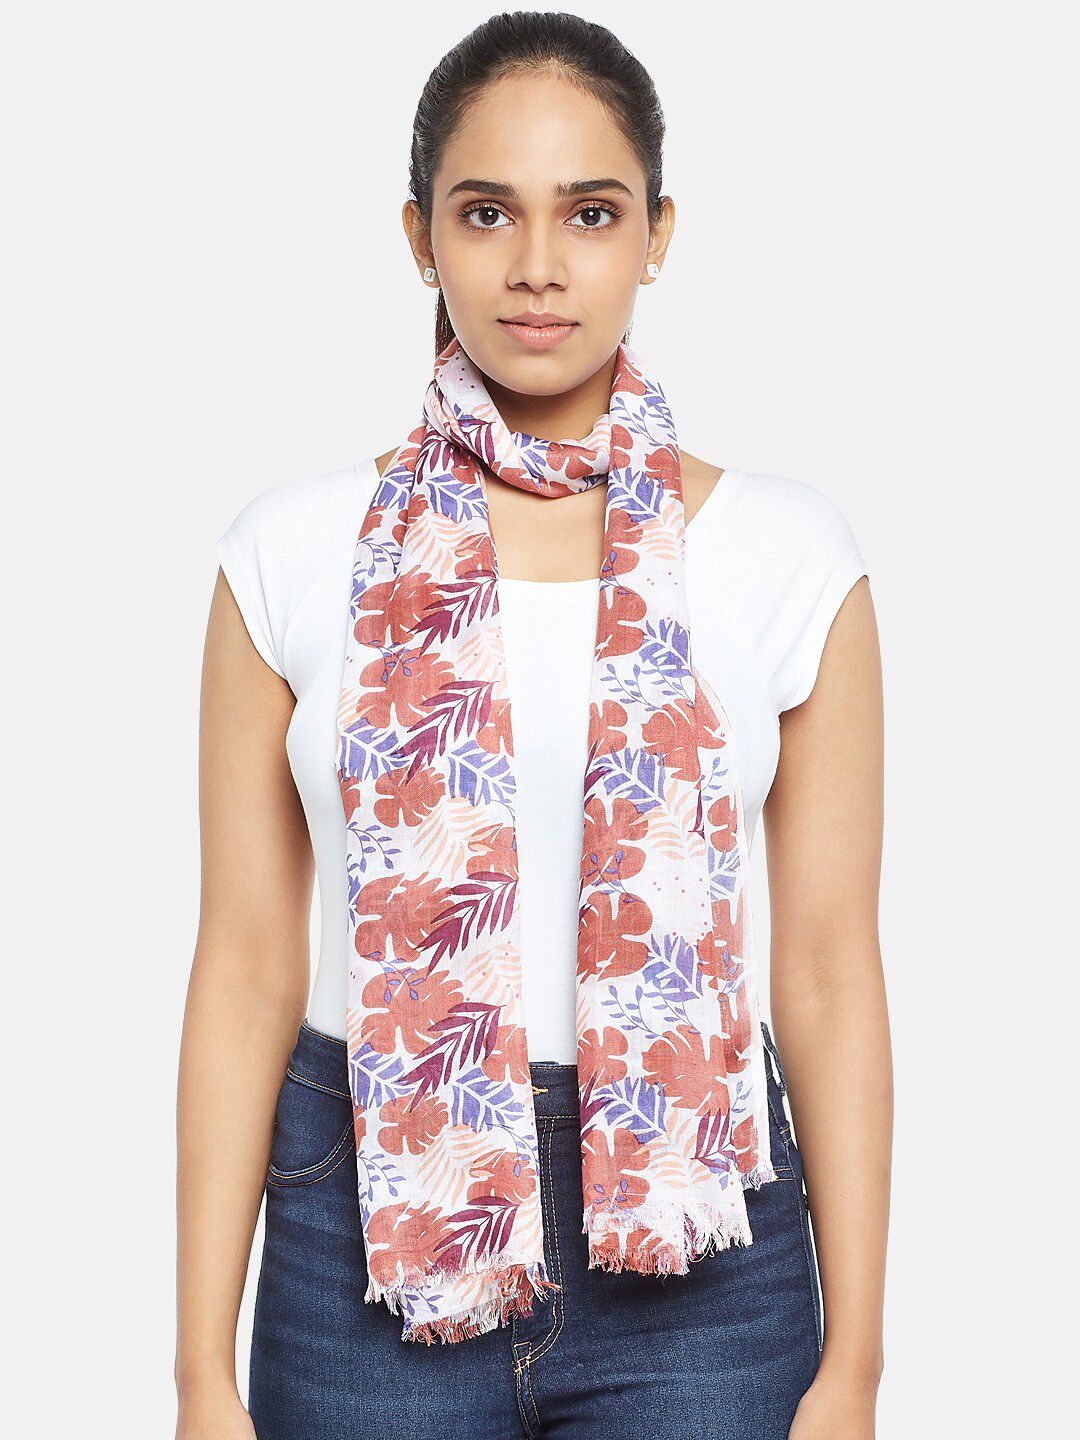 Honey by Pantaloons Women Brown & White Printed Scarf Price in India